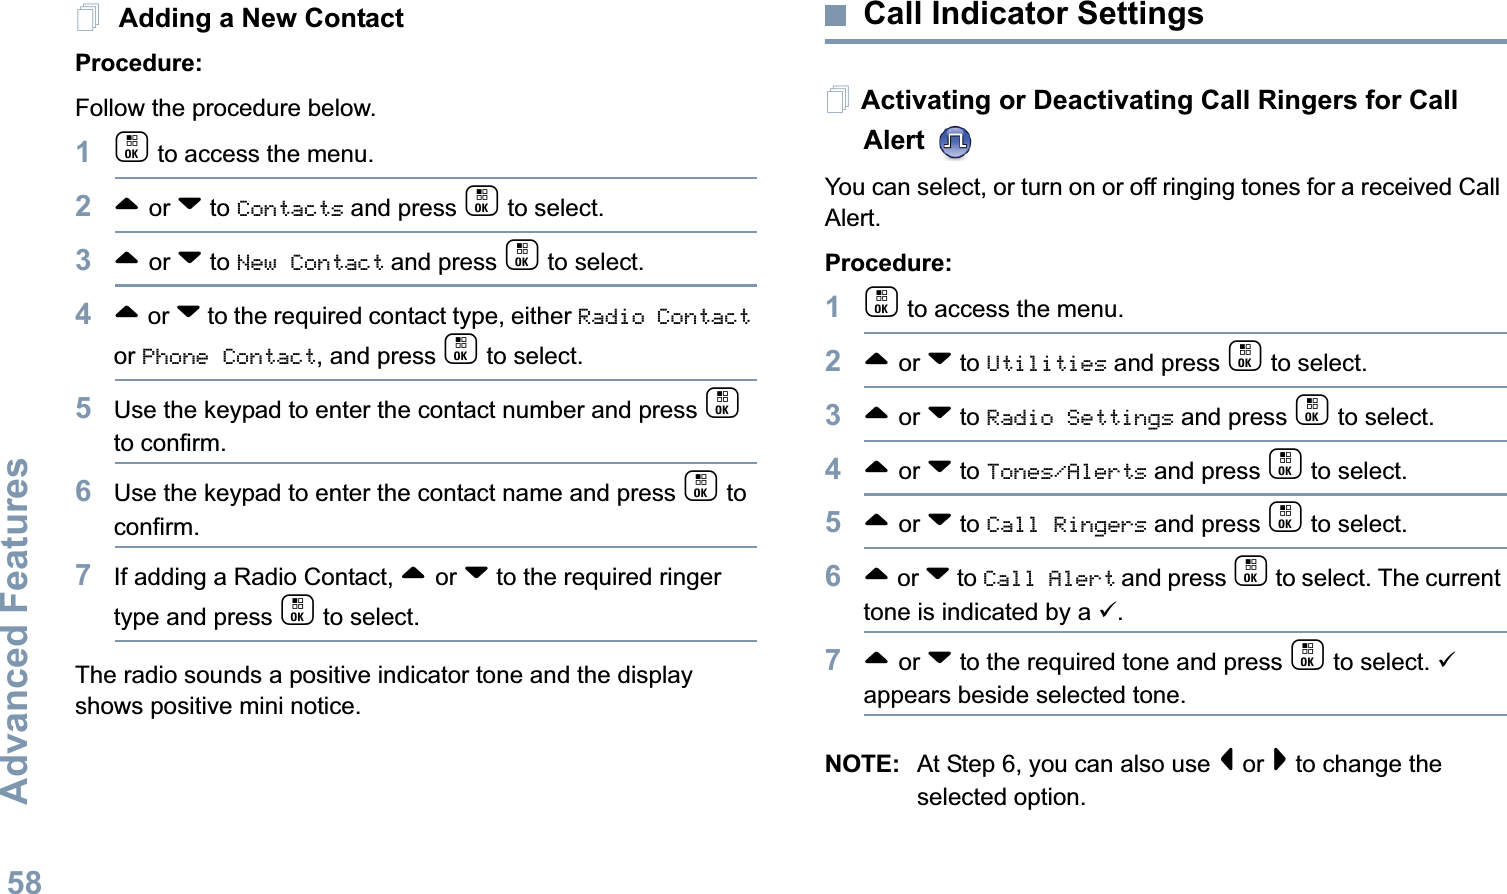 Advanced FeaturesEnglish58 Adding a New ContactProcedure:Follow the procedure below.1c to access the menu.2^ or v to Contacts and press c to select.3^ or v to New Contact and press c to select.4^ or v to the required contact type, either Radio Contact or Phone Contact, and press c to select.5Use the keypad to enter the contact number and press c to confirm.6Use the keypad to enter the contact name and press c to confirm.7If adding a Radio Contact, ^ or v to the required ringer type and press c to select. The radio sounds a positive indicator tone and the display shows positive mini notice.Call Indicator Settings Activating or Deactivating Call Ringers for Call Alert   You can select, or turn on or off ringing tones for a received Call Alert.Procedure: 1c to access the menu.2^ or v to Utilities and press c to select.3^ or v to Radio Settings and press c to select.4^ or v to Tones/Alerts and press c to select.5^ or v to Call Ringers and press c to select.6^ or v to Call Alert and press c to select. The current tone is indicated by a 9.7^ or v to the required tone and press c to select. 9 appears beside selected tone. NOTE: At Step 6, you can also use &lt; or &gt; to change the selected option.